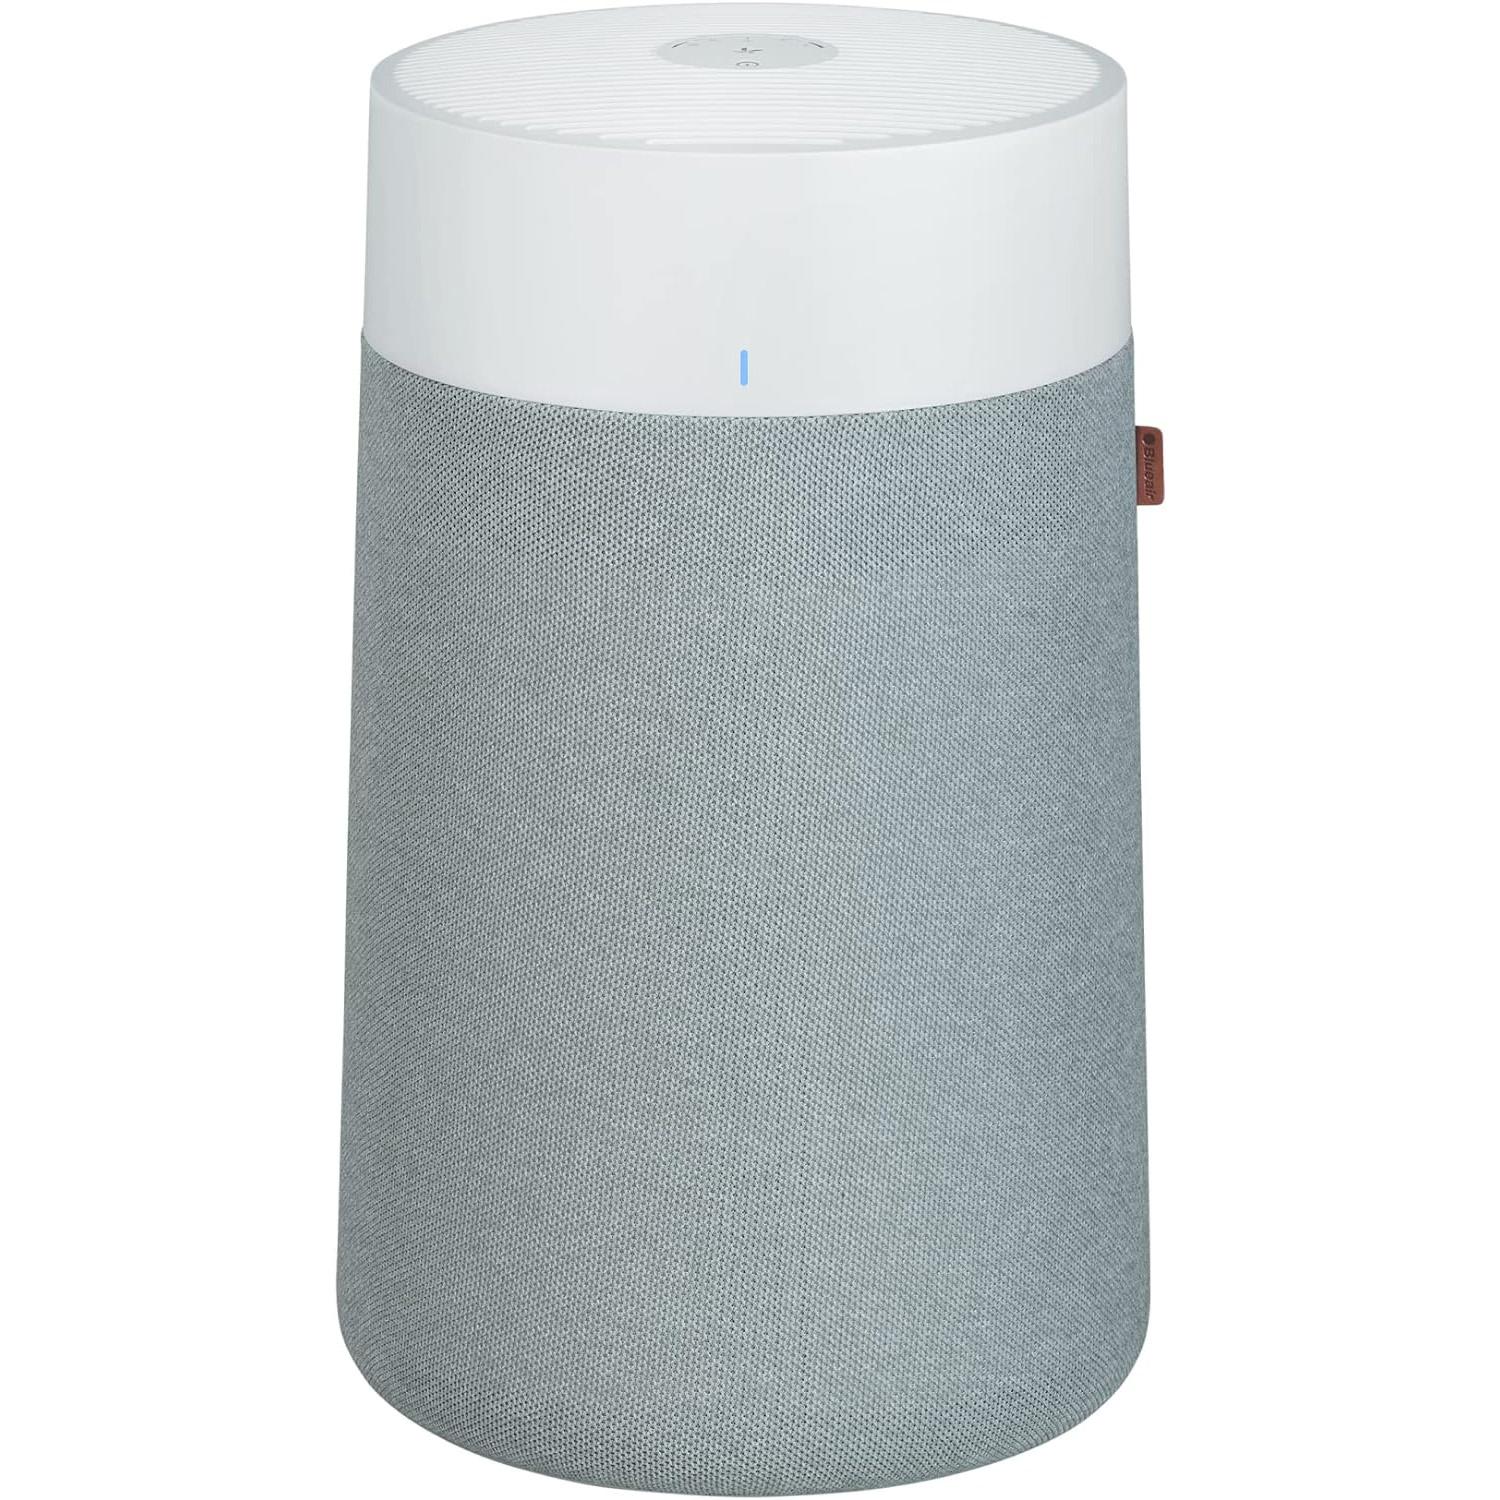 Blue Pure 411a Max Air Purifier for $68.25 Shipped